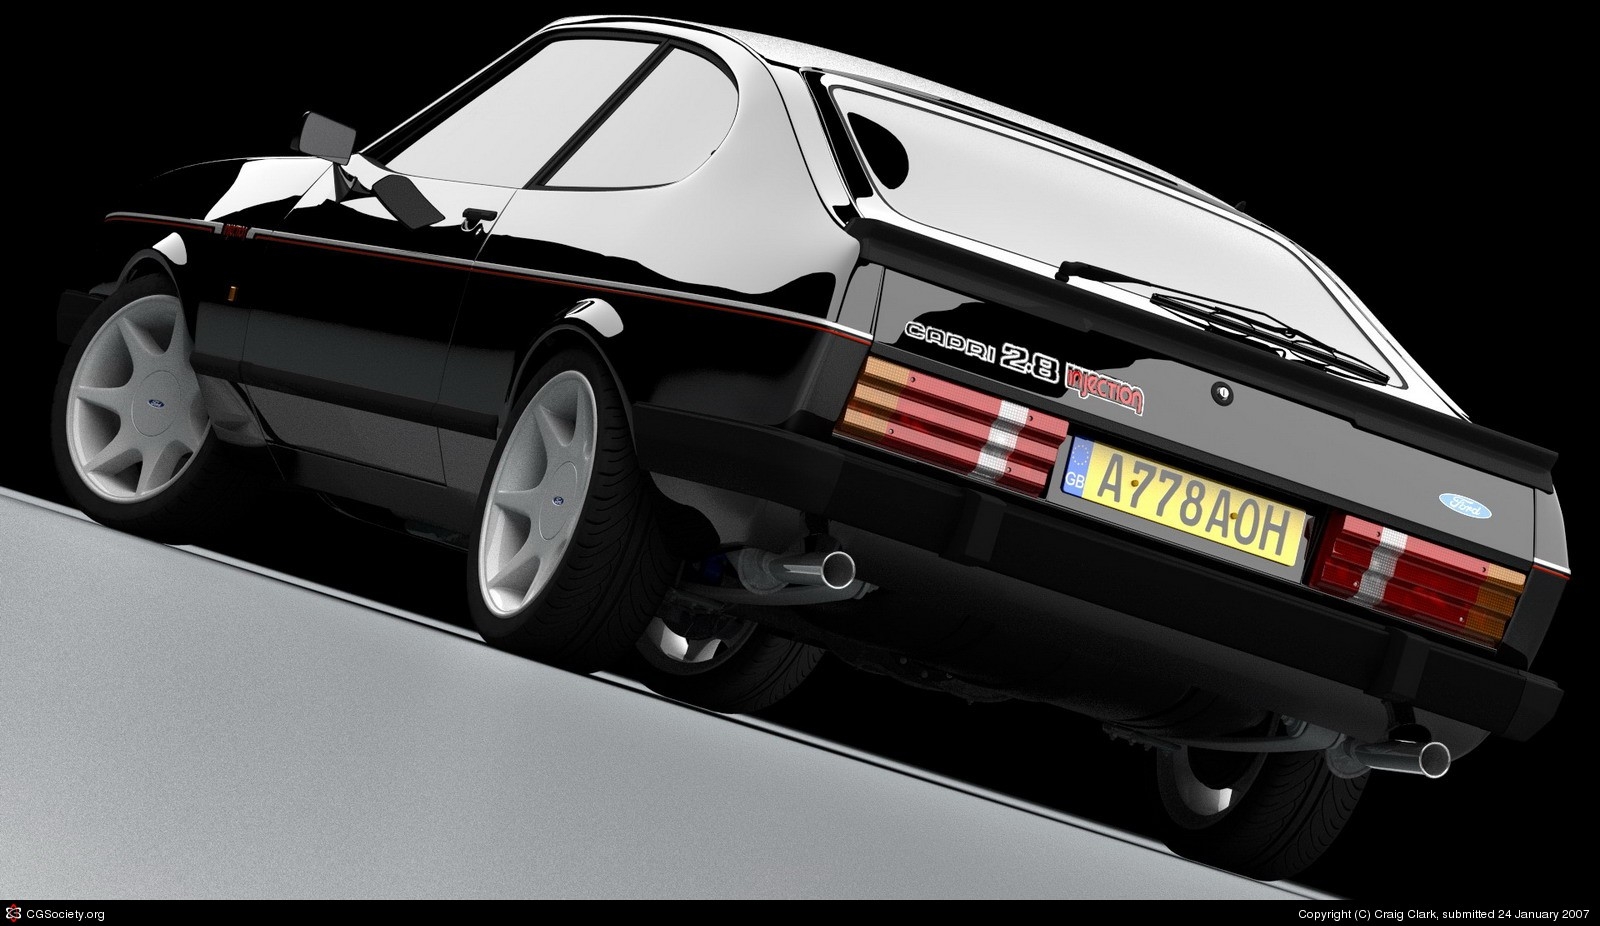 ford capri 2.8 injection-pic. 3